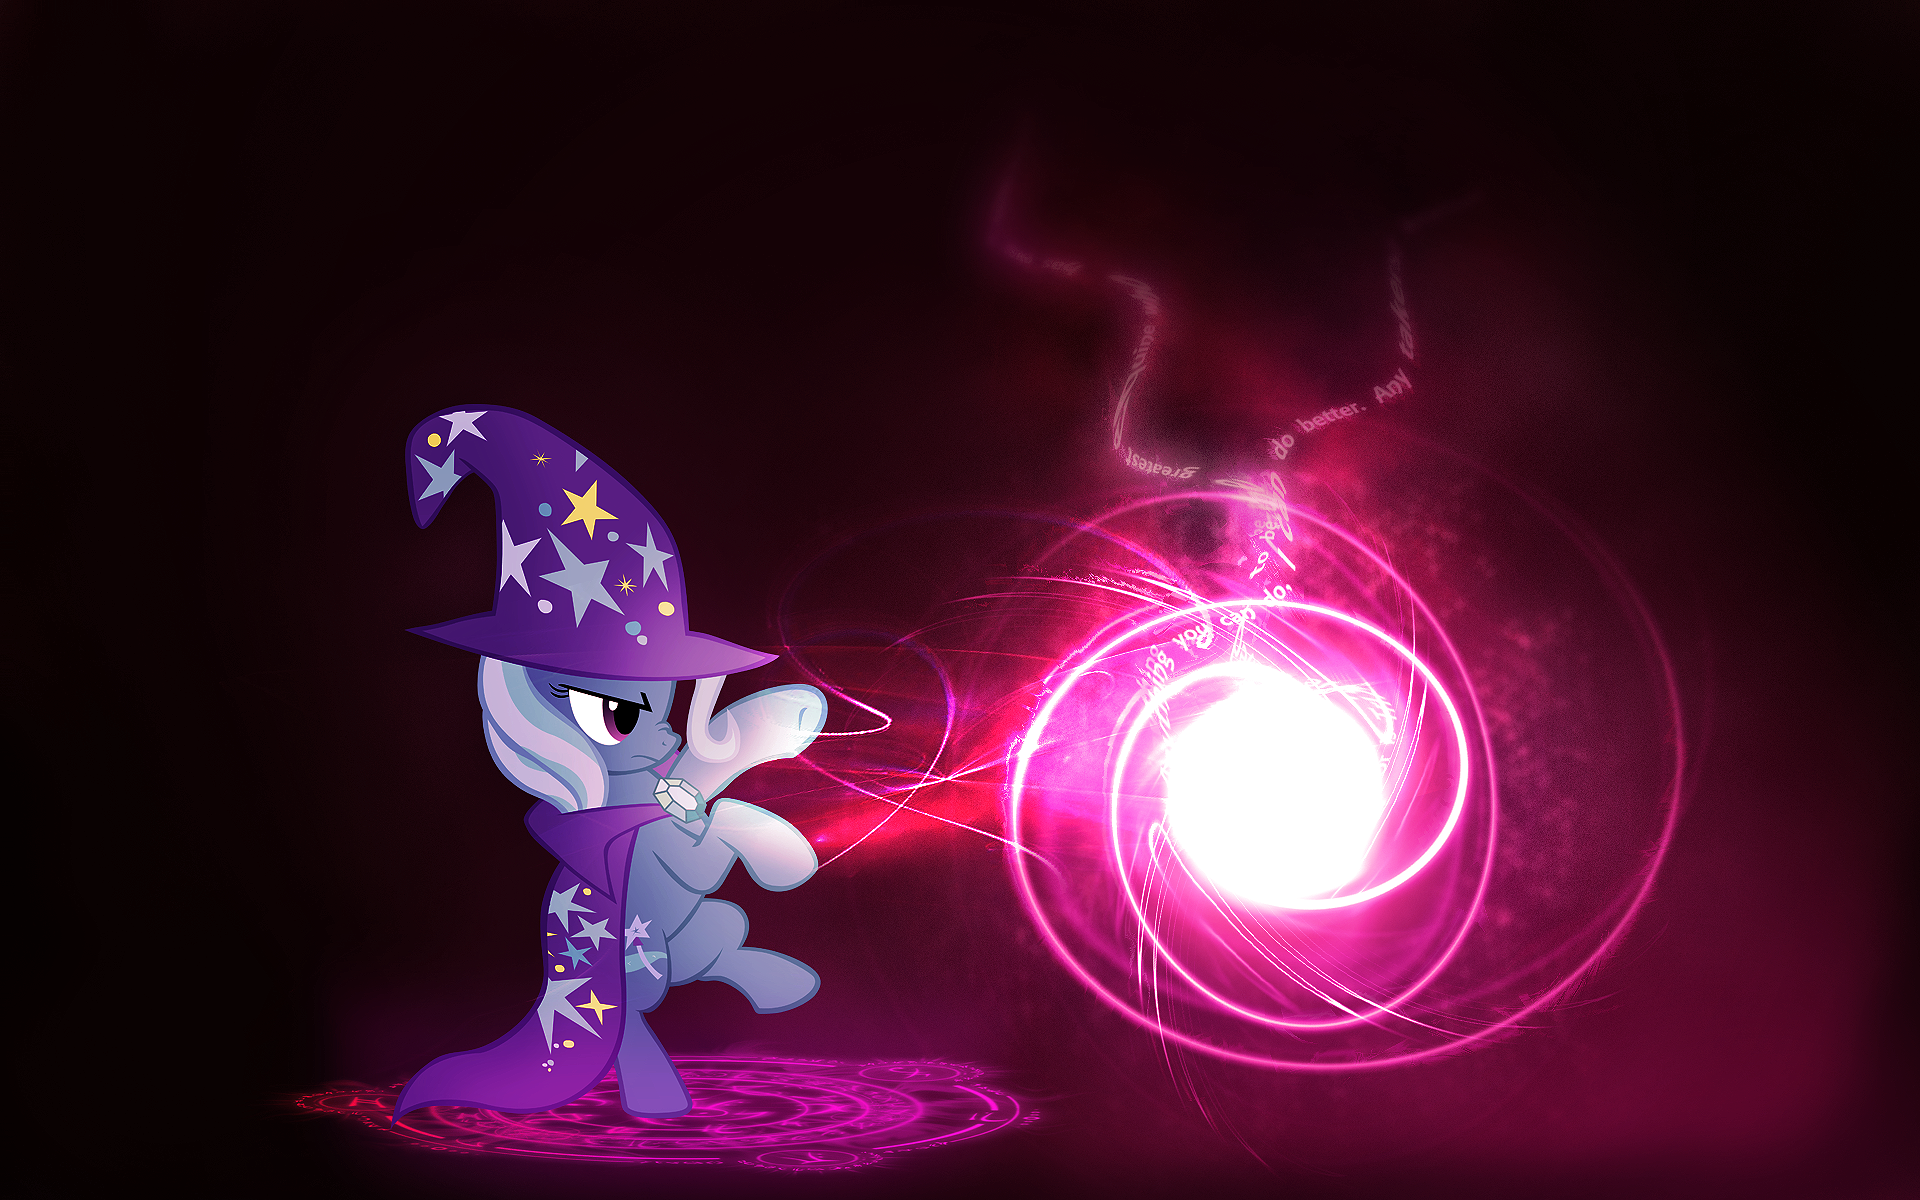 Talent - Trixie by ShelltoonTV and Vividkinz